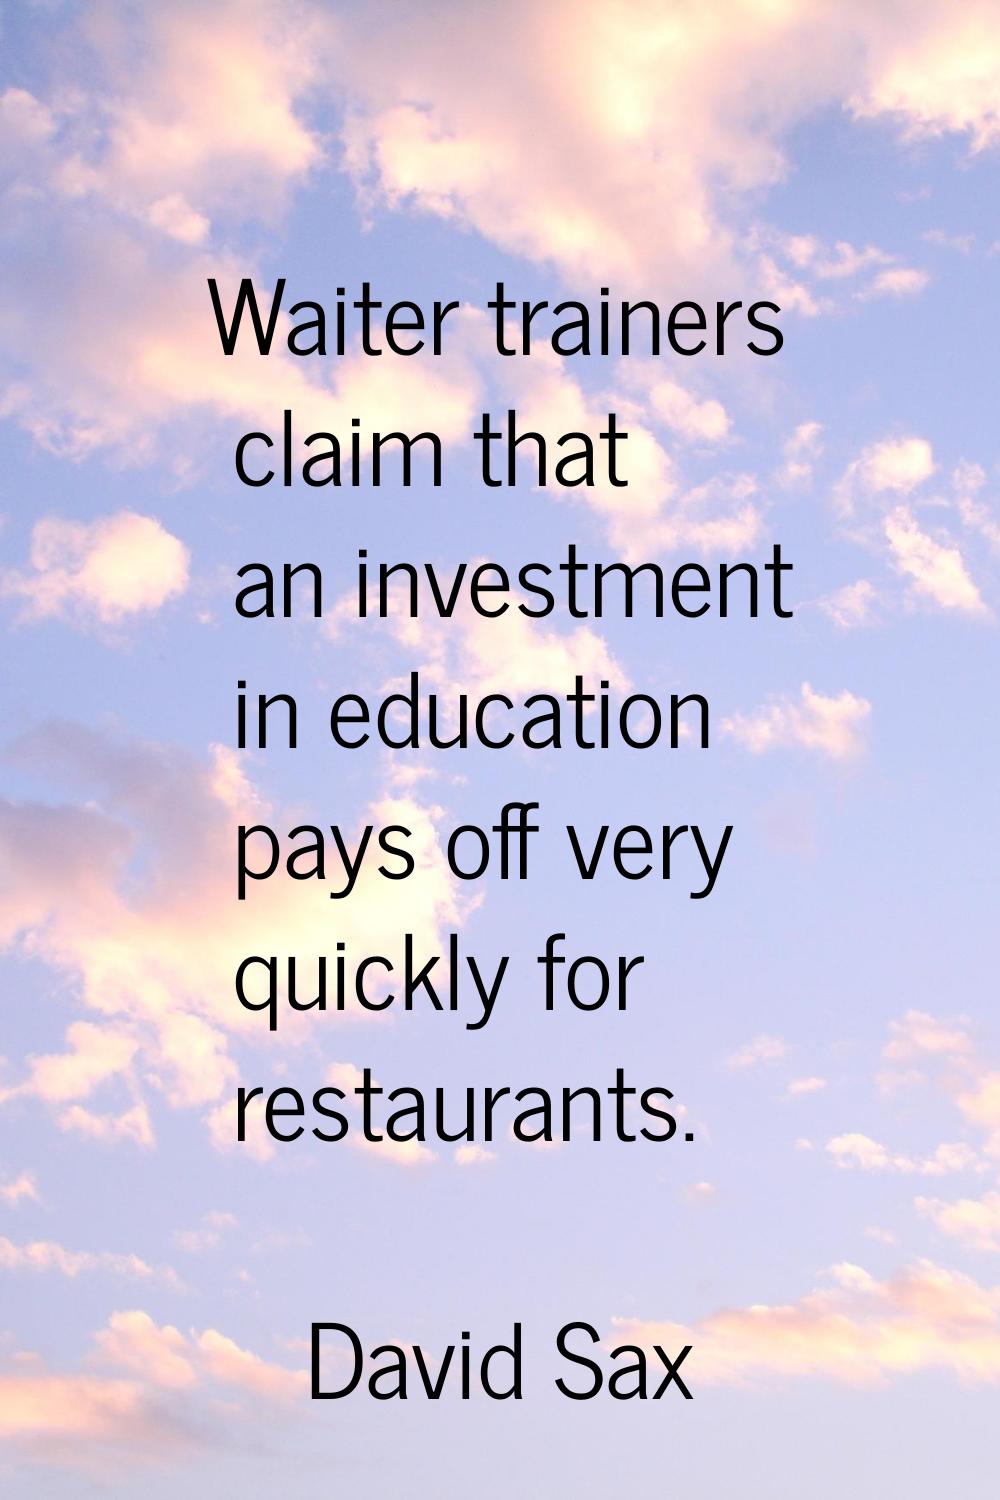 Waiter trainers claim that an investment in education pays off very quickly for restaurants.